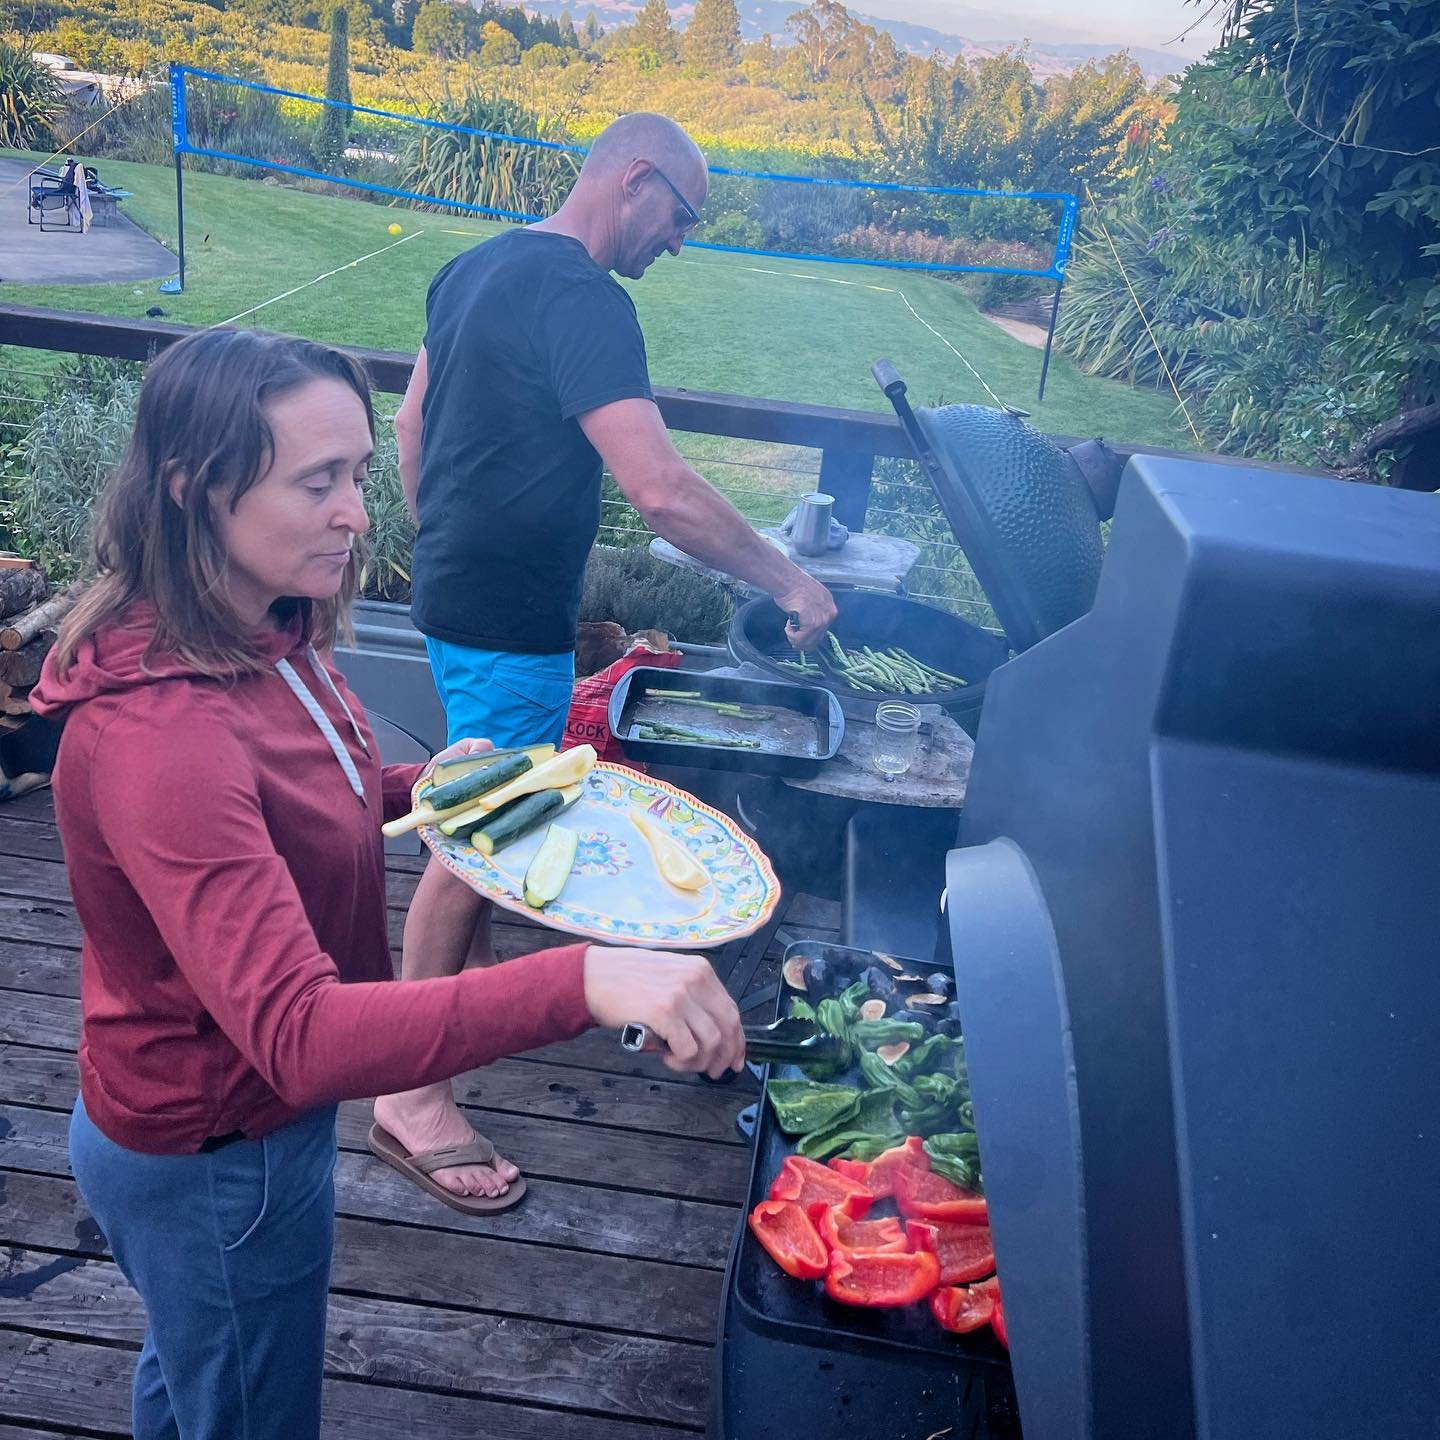 Cooking on the @bakewellburners and @biggreenegg side-by-side. 

There&rsquo;s also a portable gas grill going on the Bakewell side table (not pictured) 😜. Can&rsquo;t we all be friends 💫😉?

#campout #outdoorcookingrocks #outdoorcooking #woodfireo